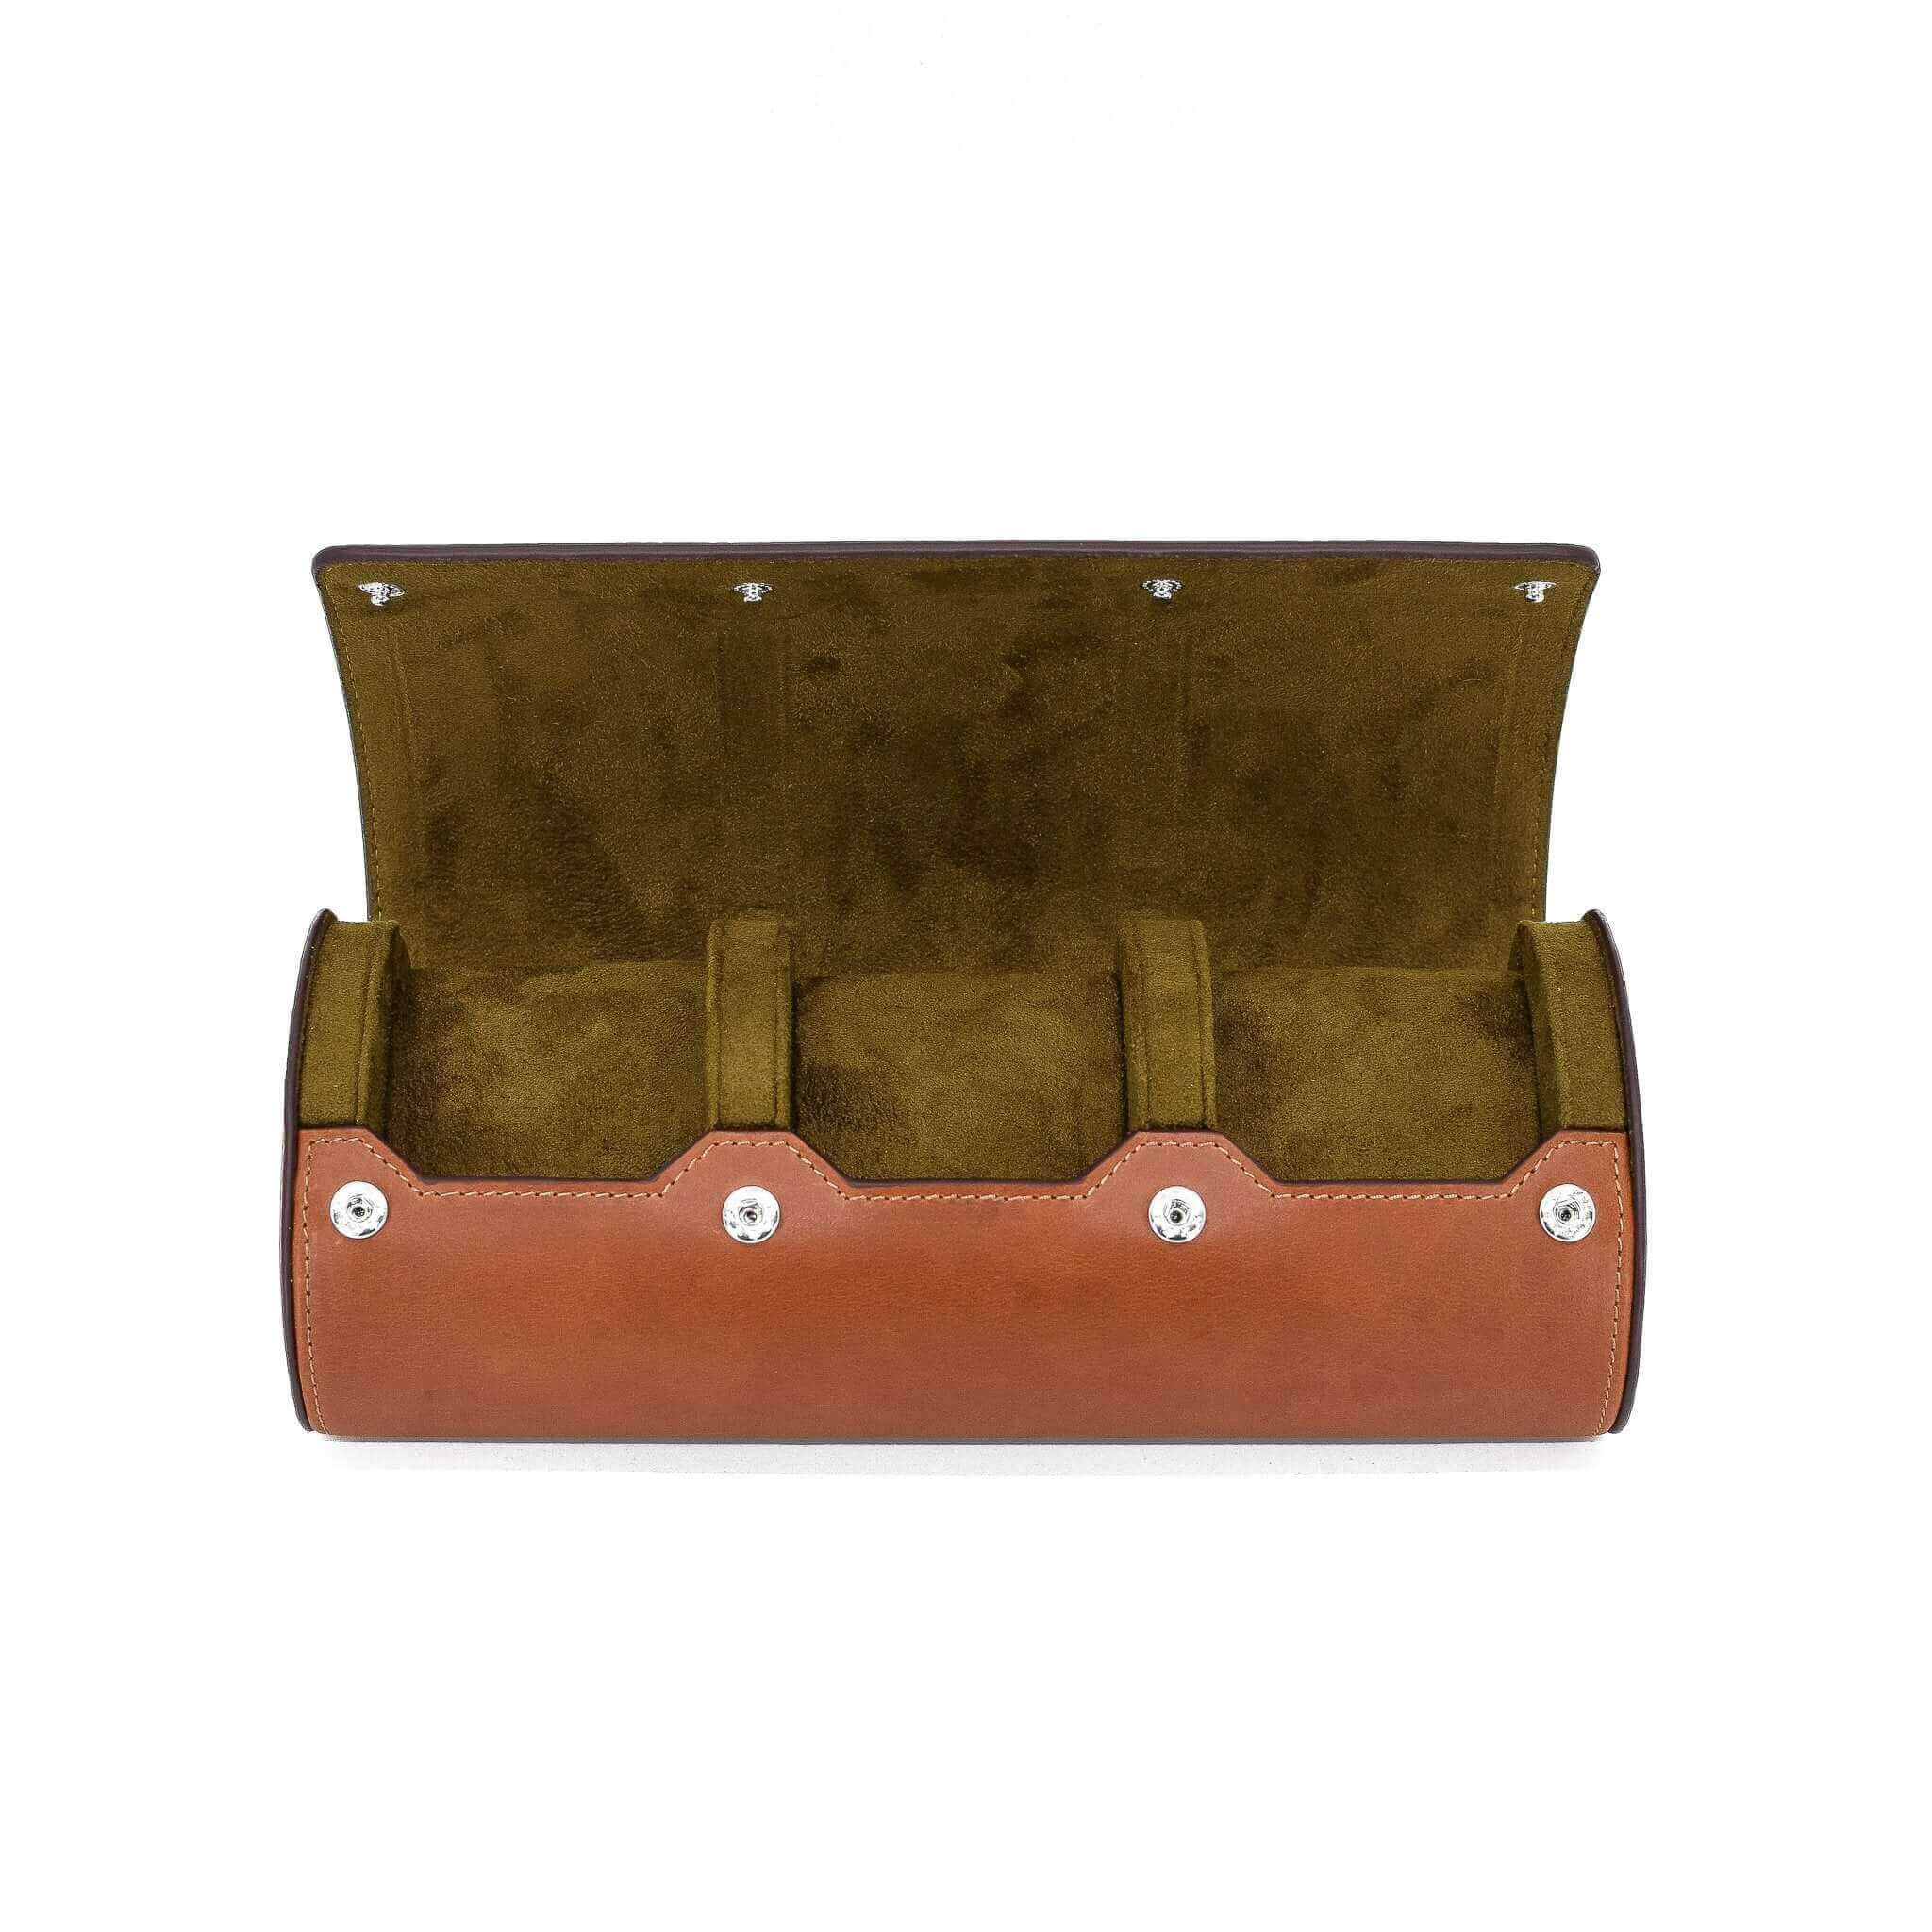 A front view showing the inside of Luxury Watch Roll's triple slot, vintage brown leather watch roll for three watch storage.